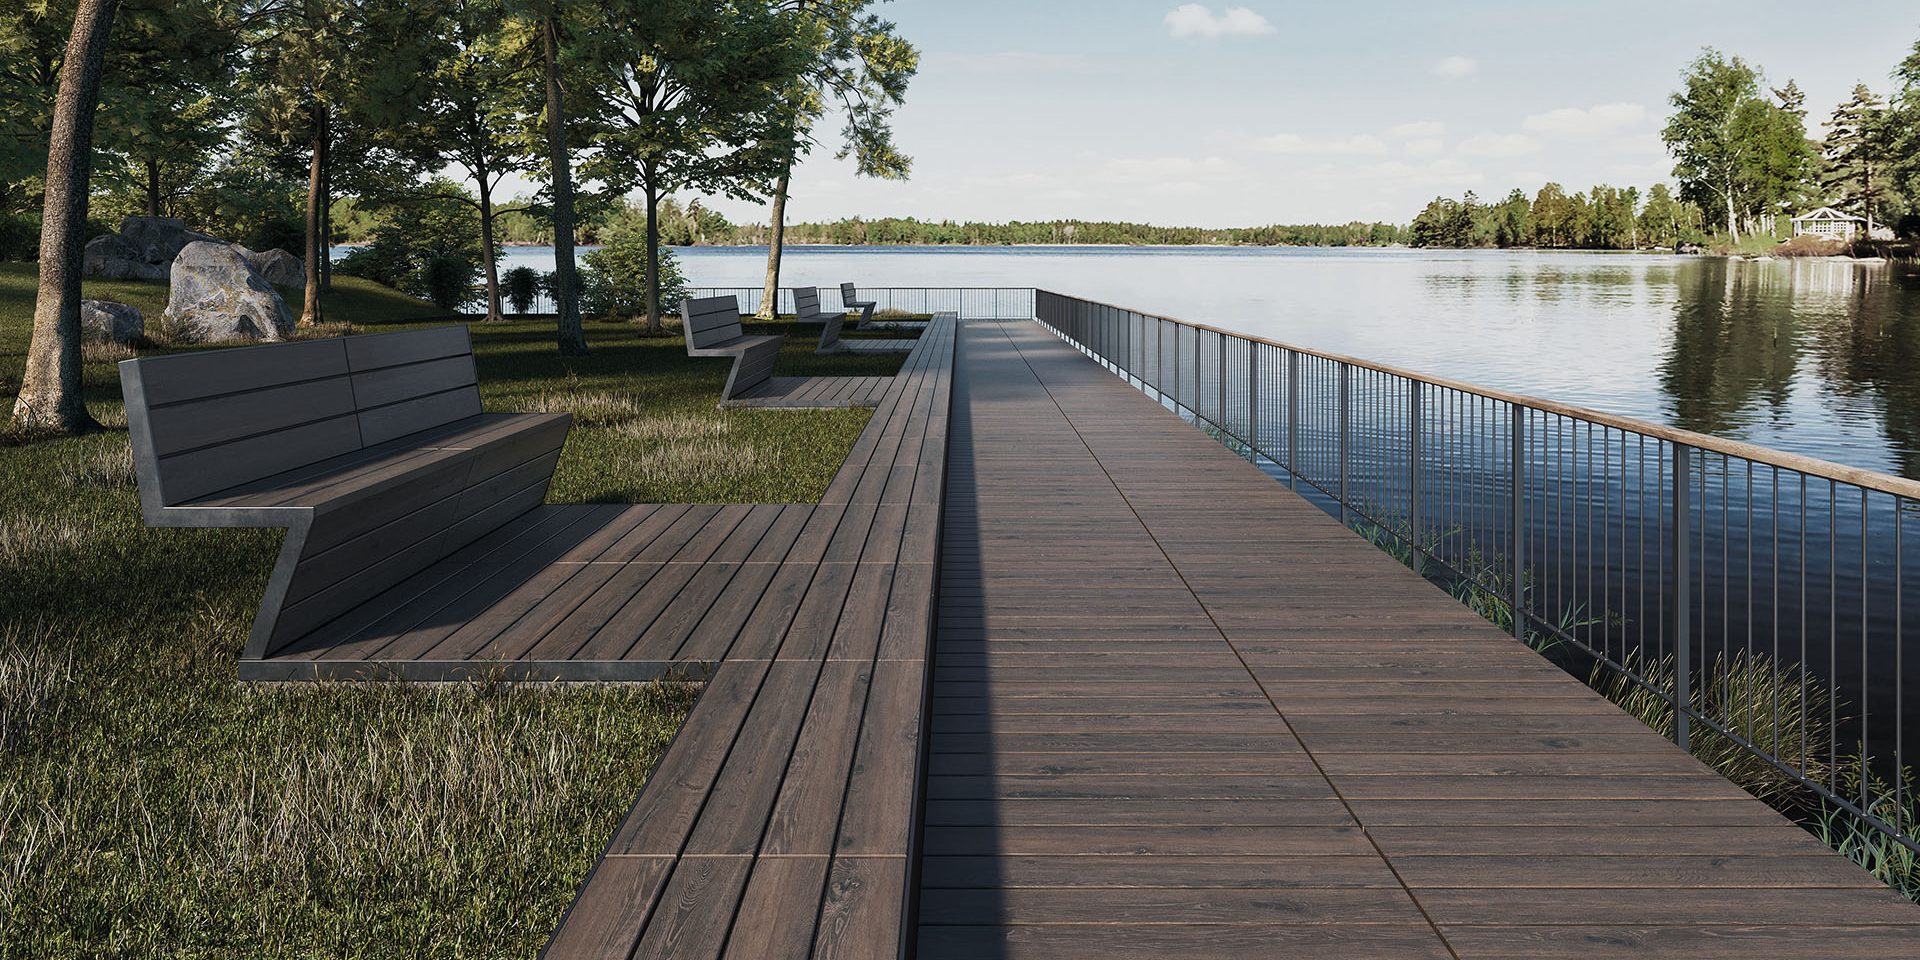 Exadeck Decking for Public Spaces